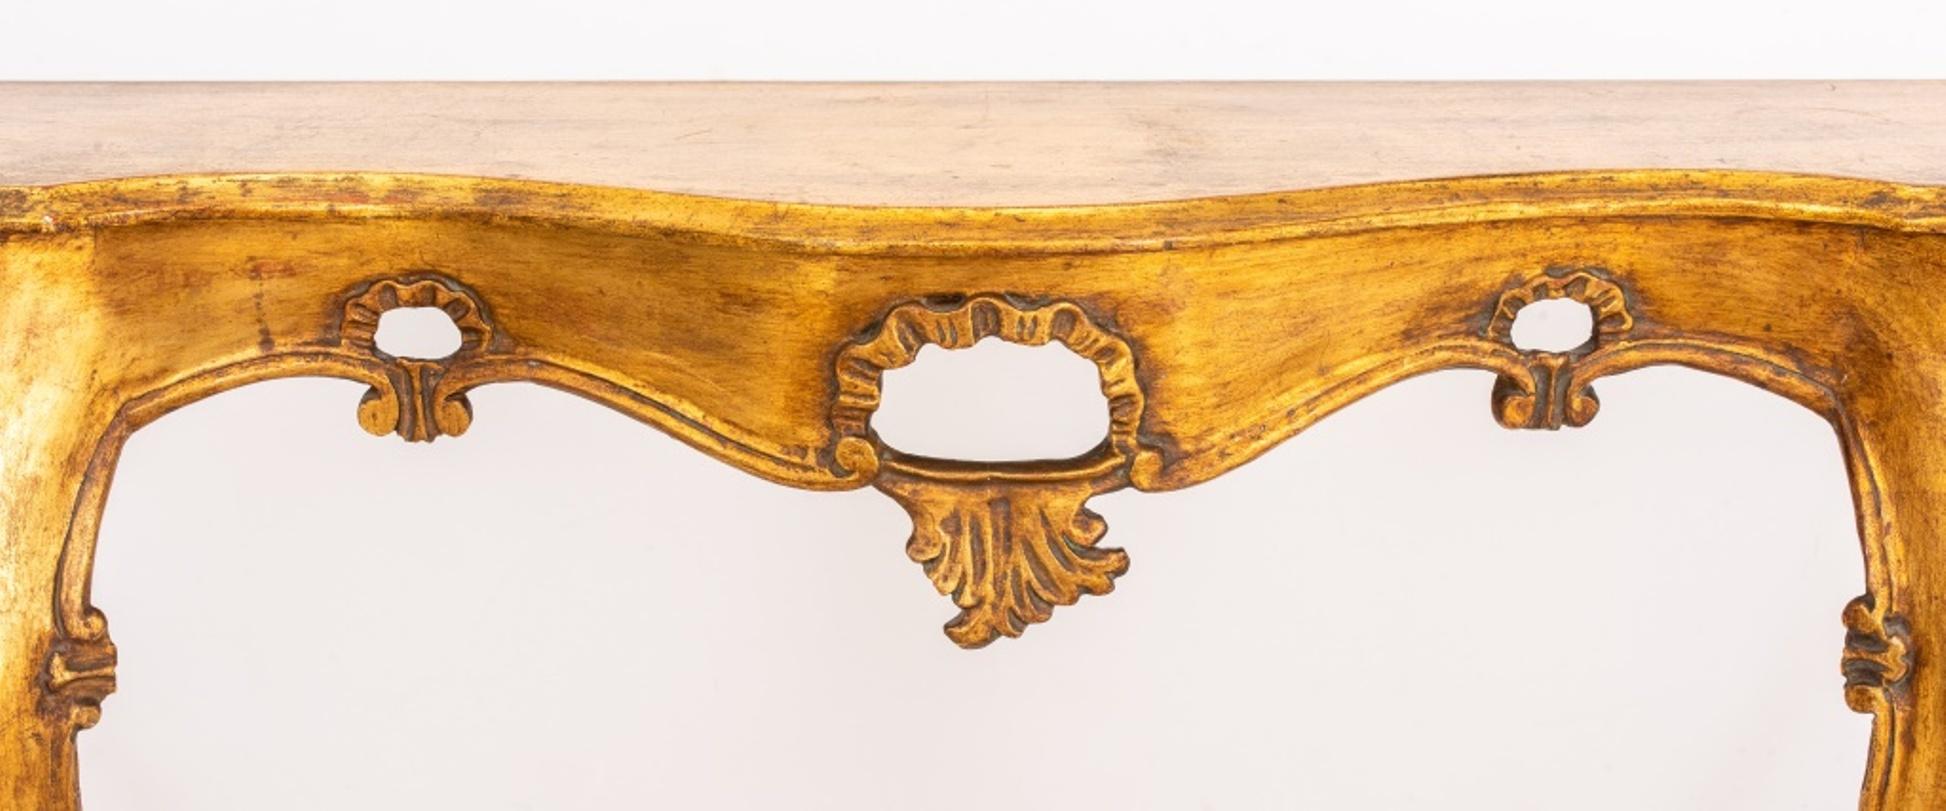 Vintage Venetian Rococo style giltwood console, circa 1960s or later, of elongated shaped form with reticulated scrolling apron on four cabriole legs. In good vintage condition. Wear consistent with age and use.

Dimensions: 33.5